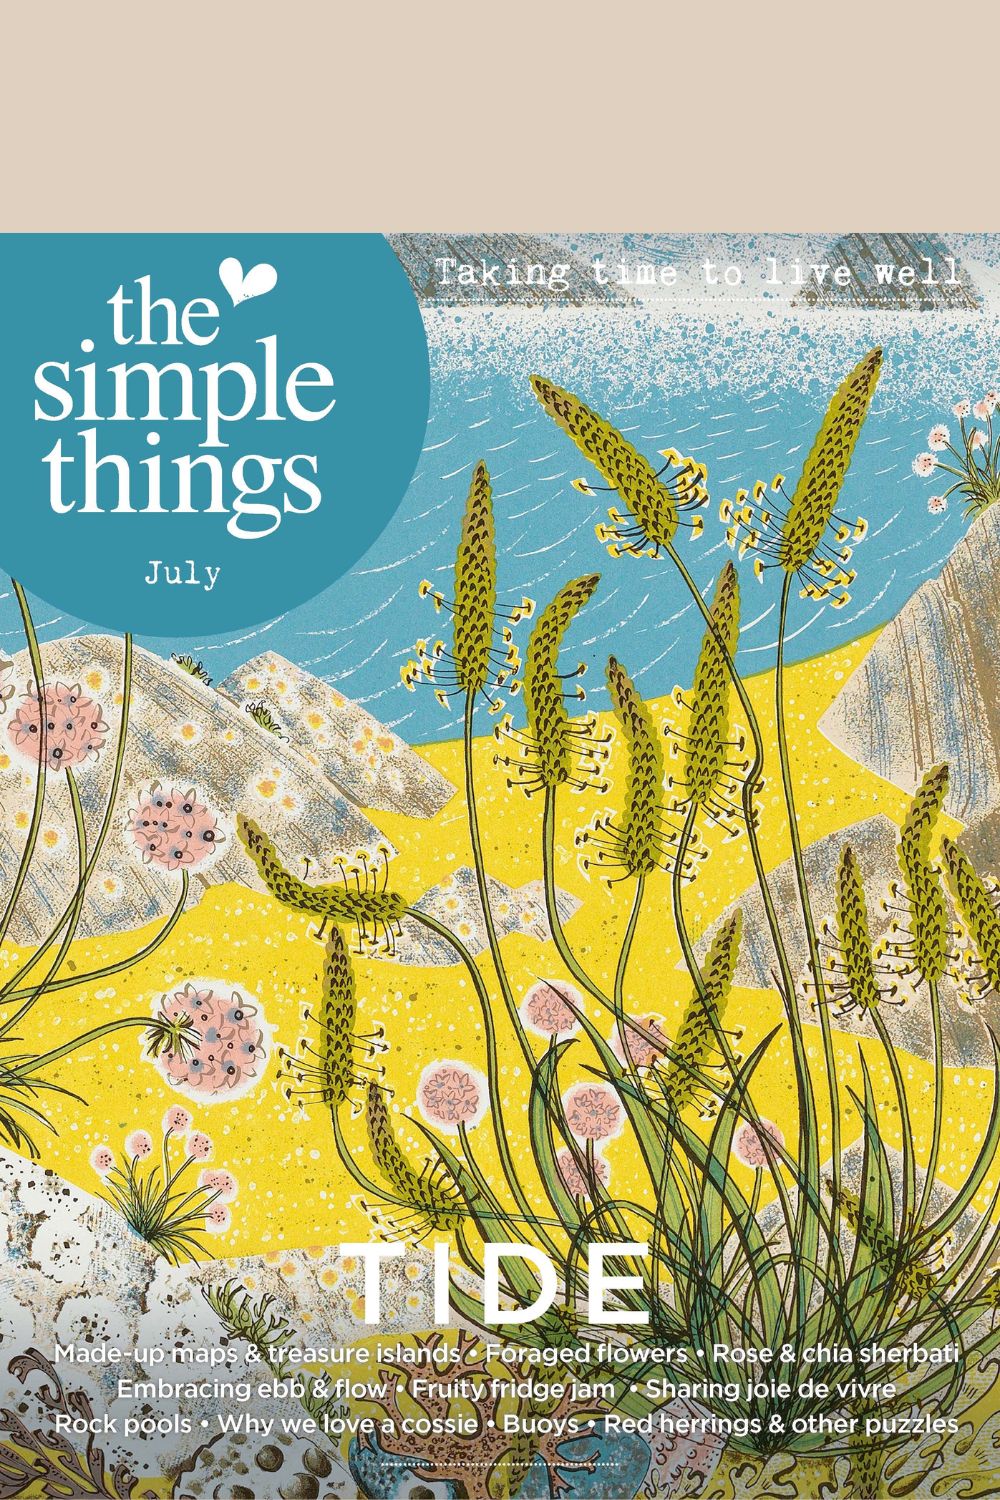 The Simple Things July issue 'Tide' (illustration by Angie Lewin)